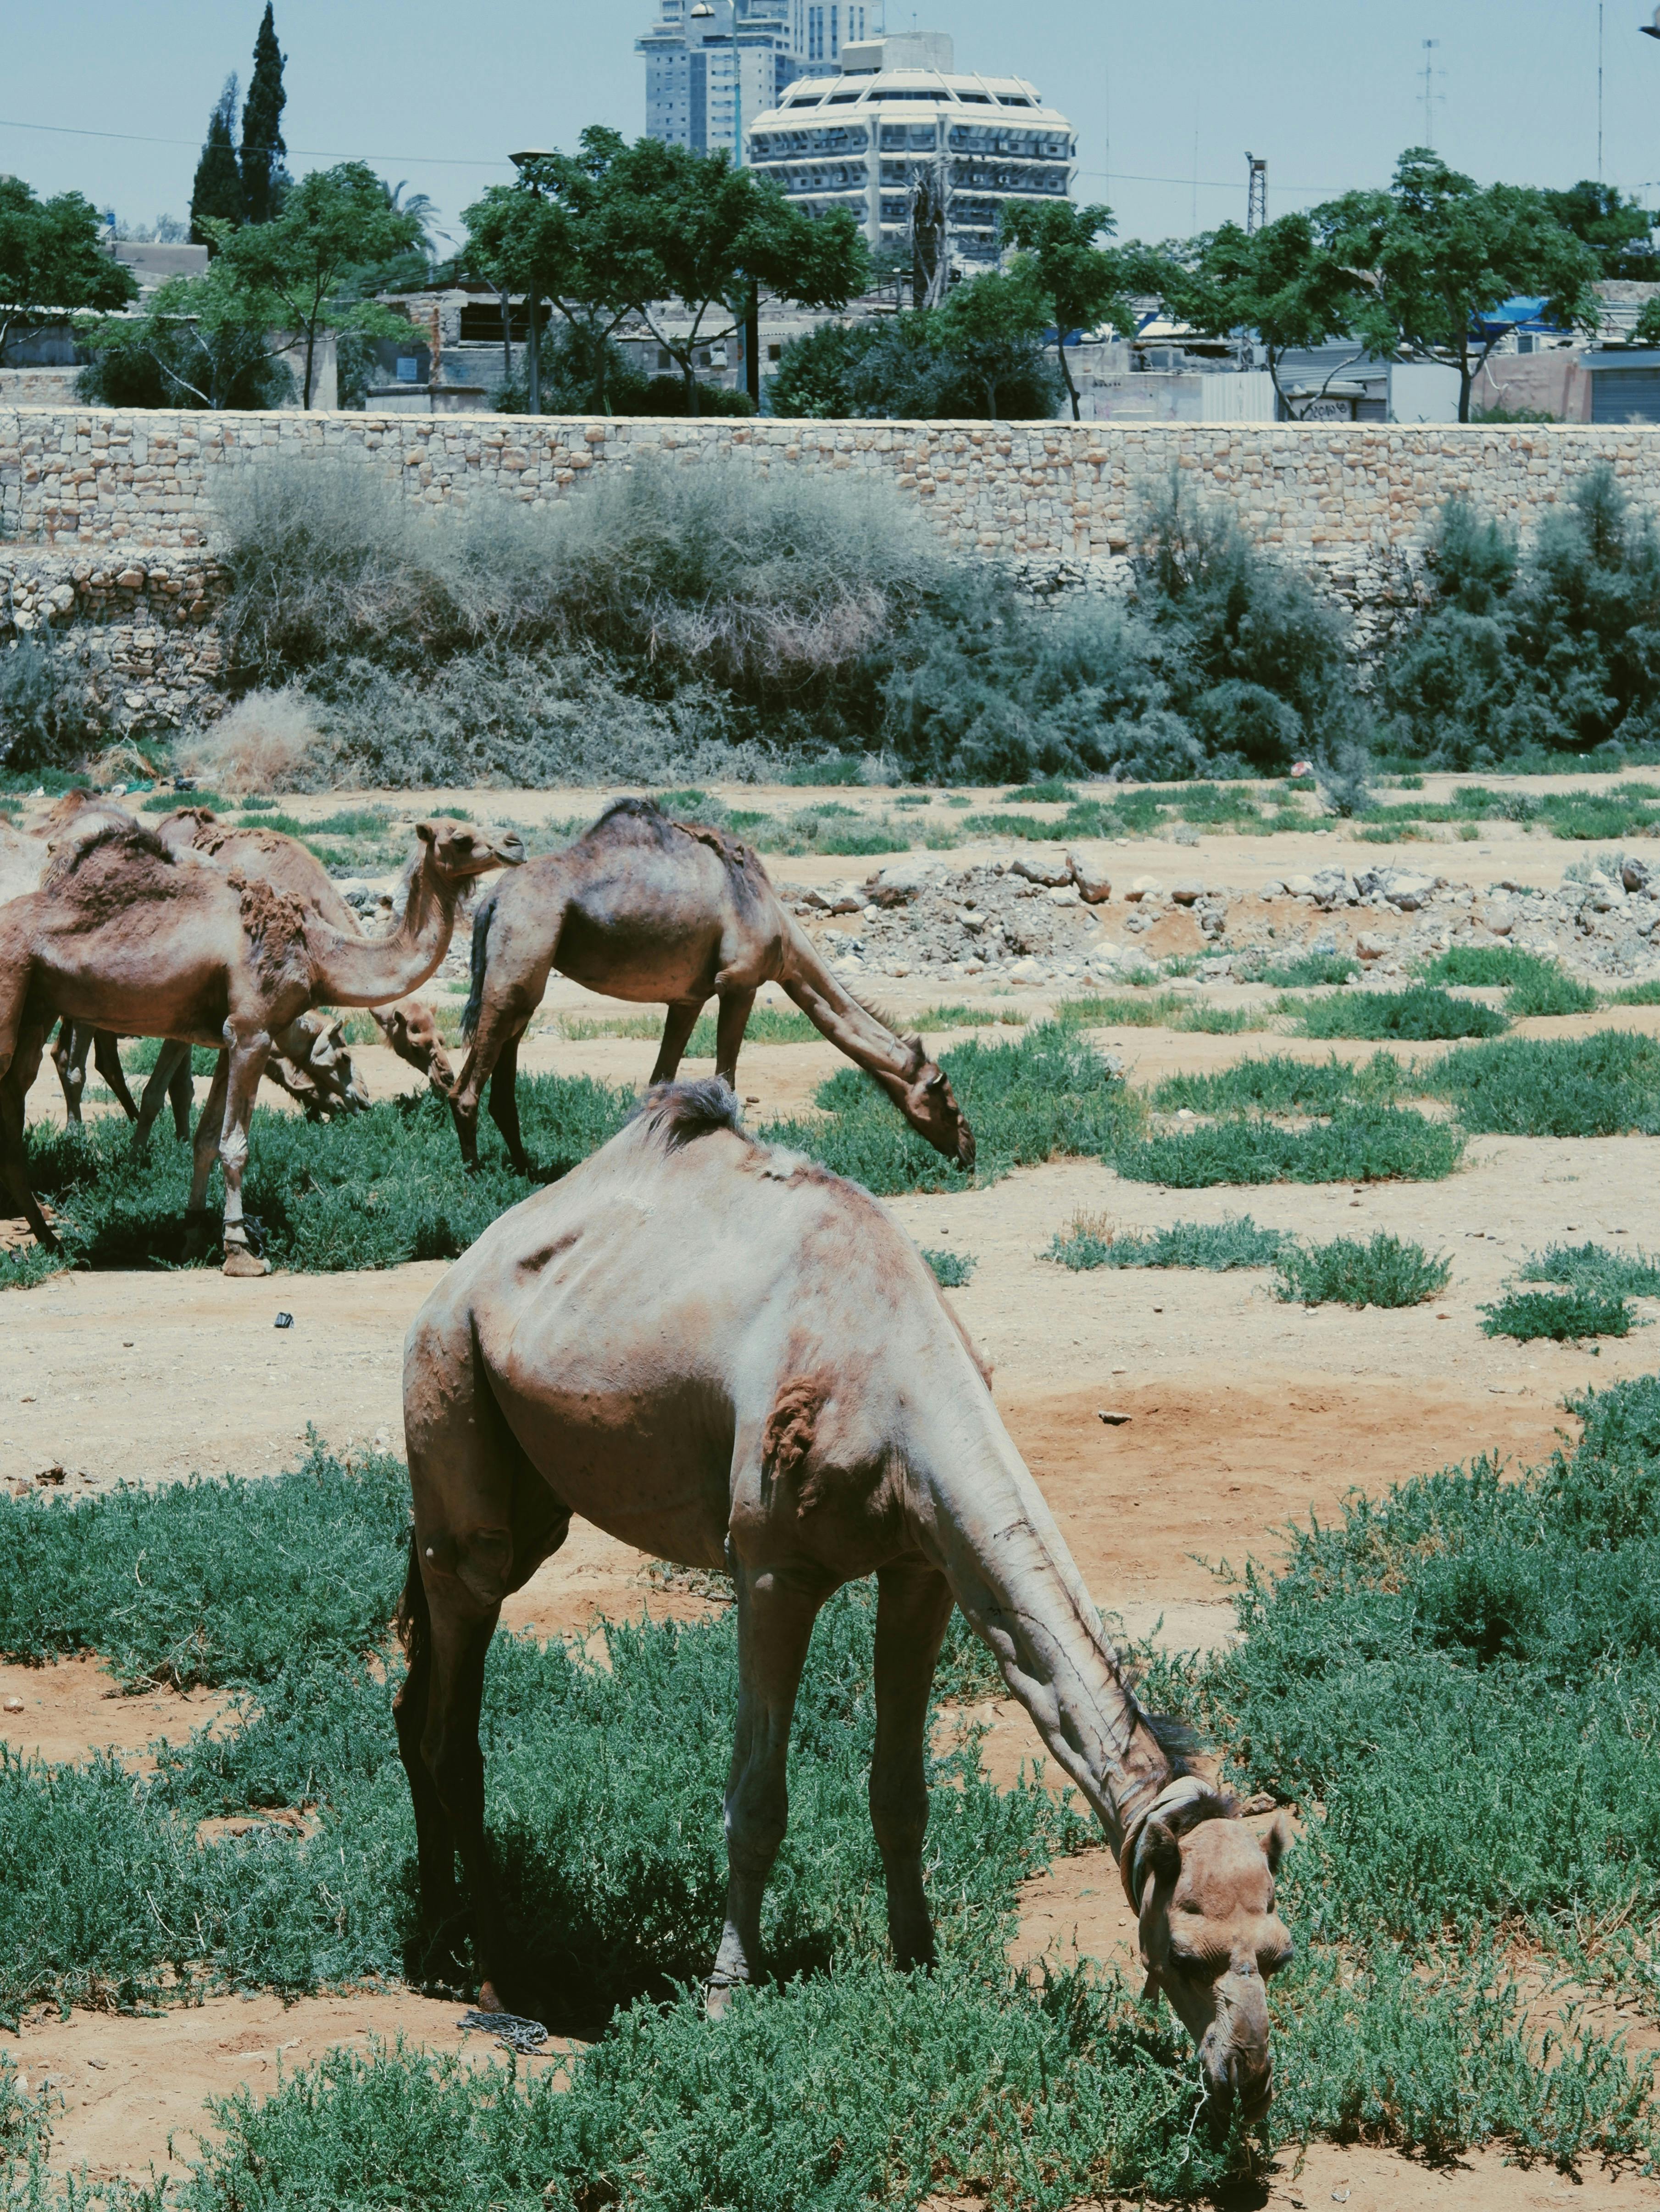 camels grazing in oasis